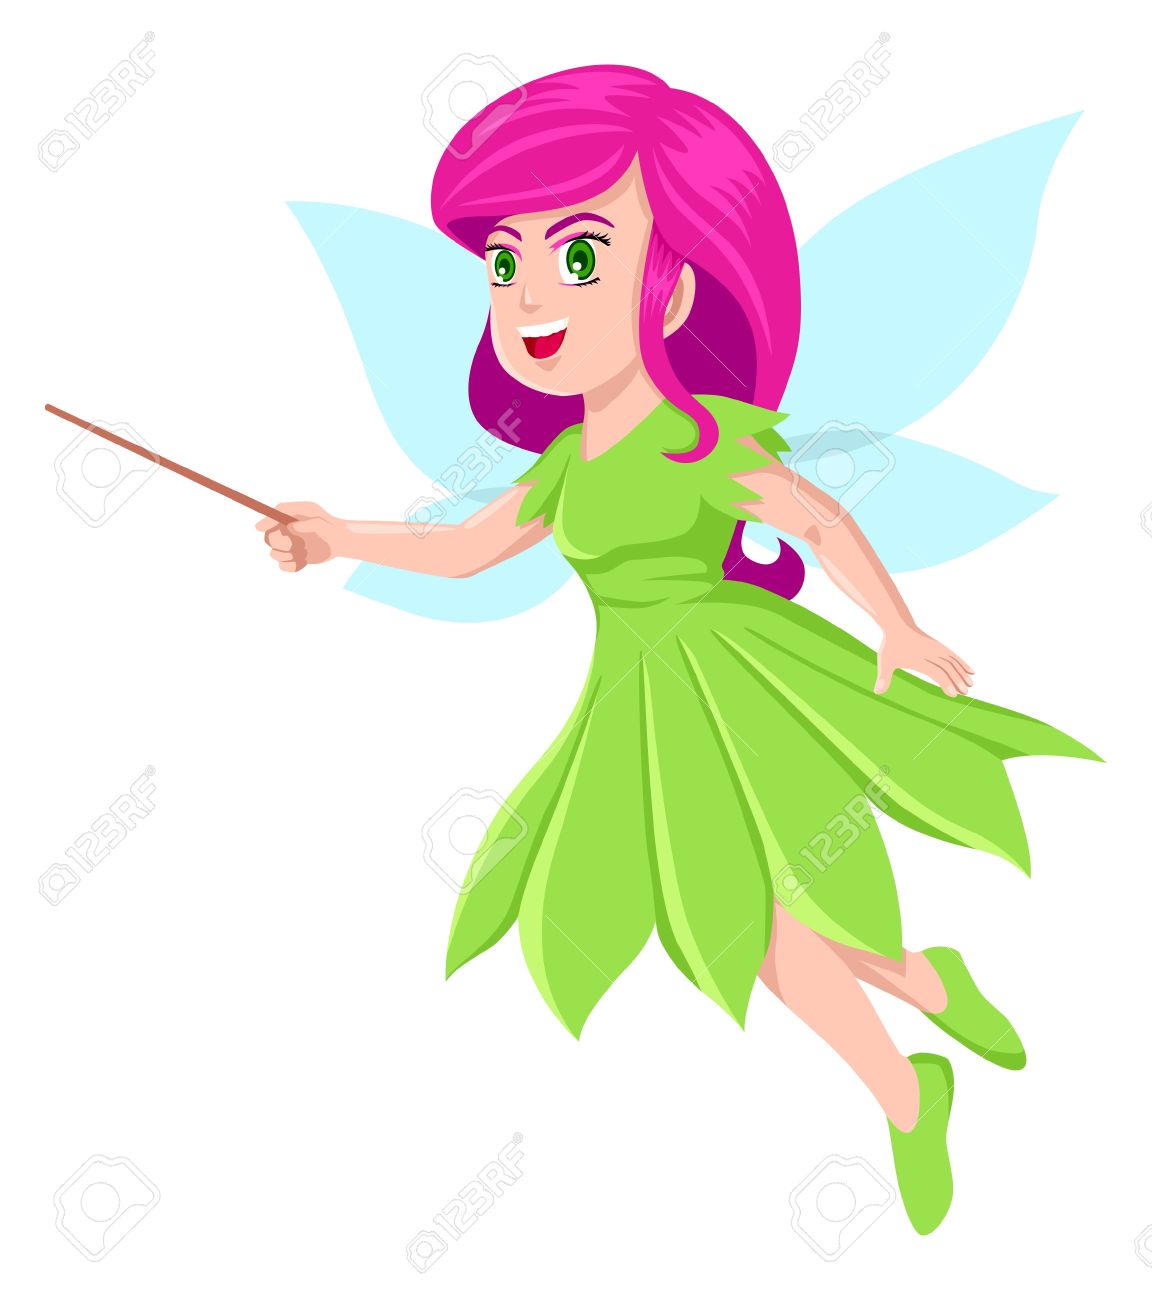 Pixie clipart #2, Download drawings